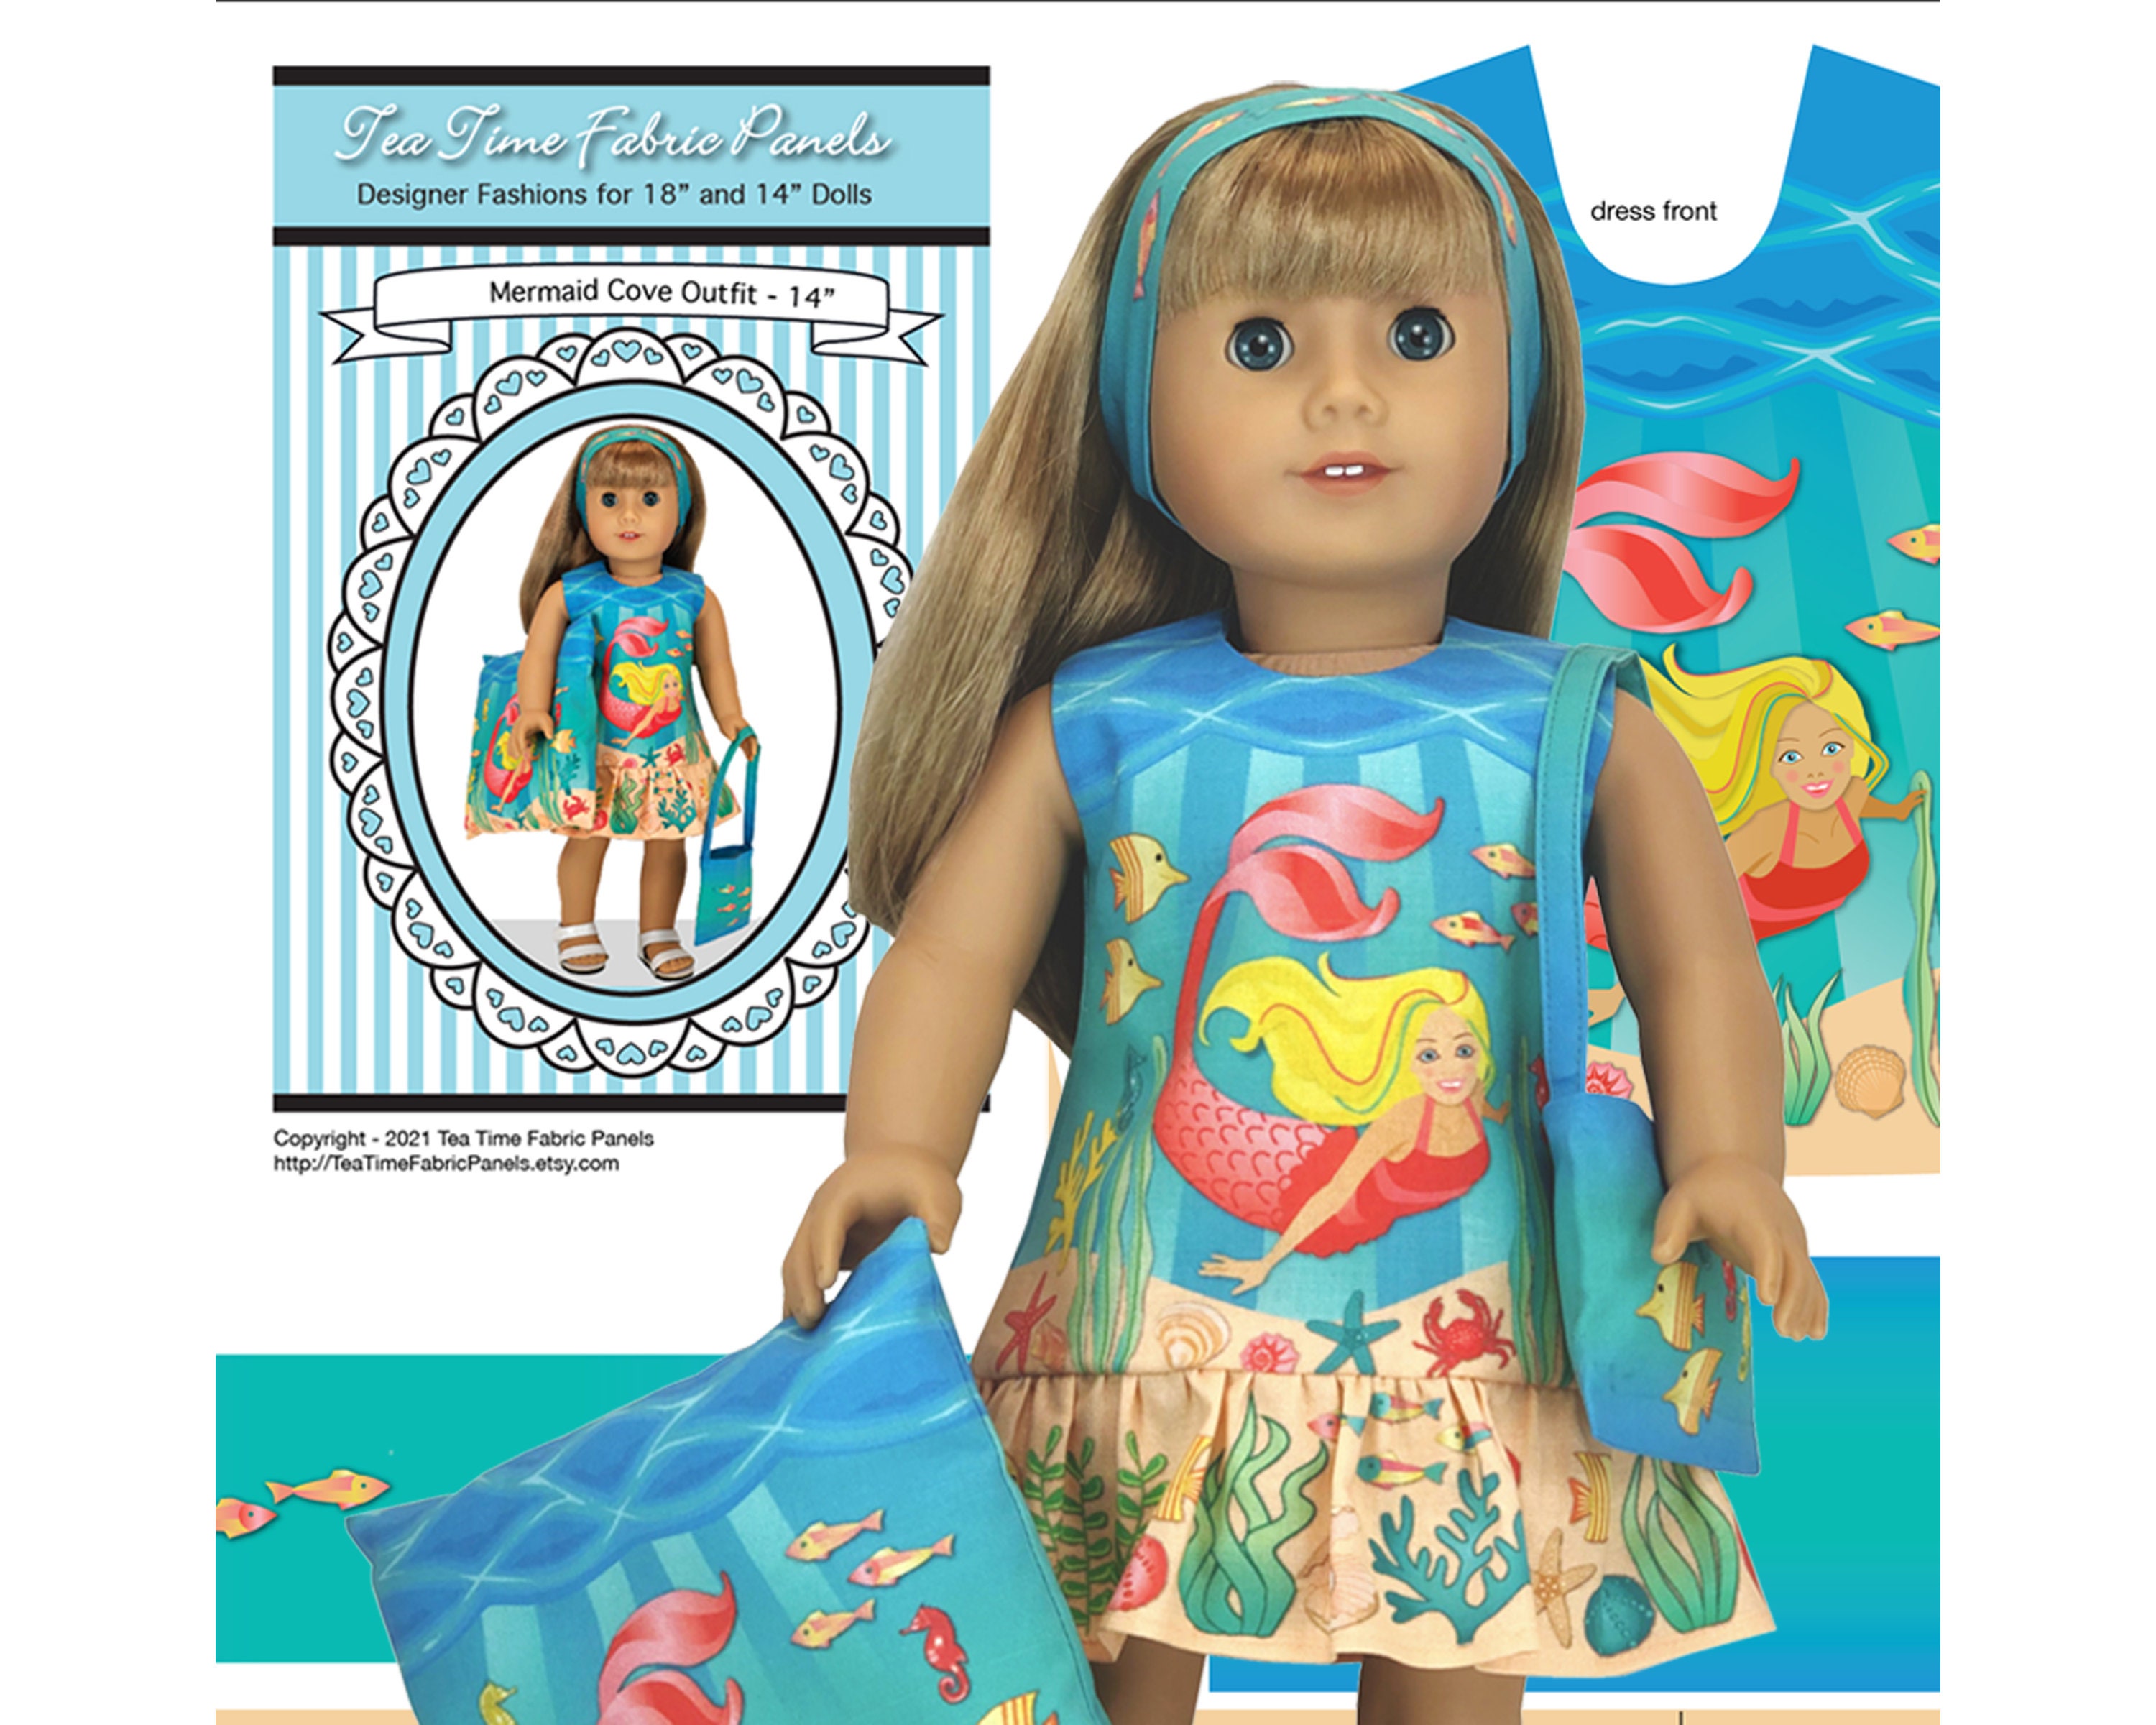 Sewing Notions for Doll Clothes